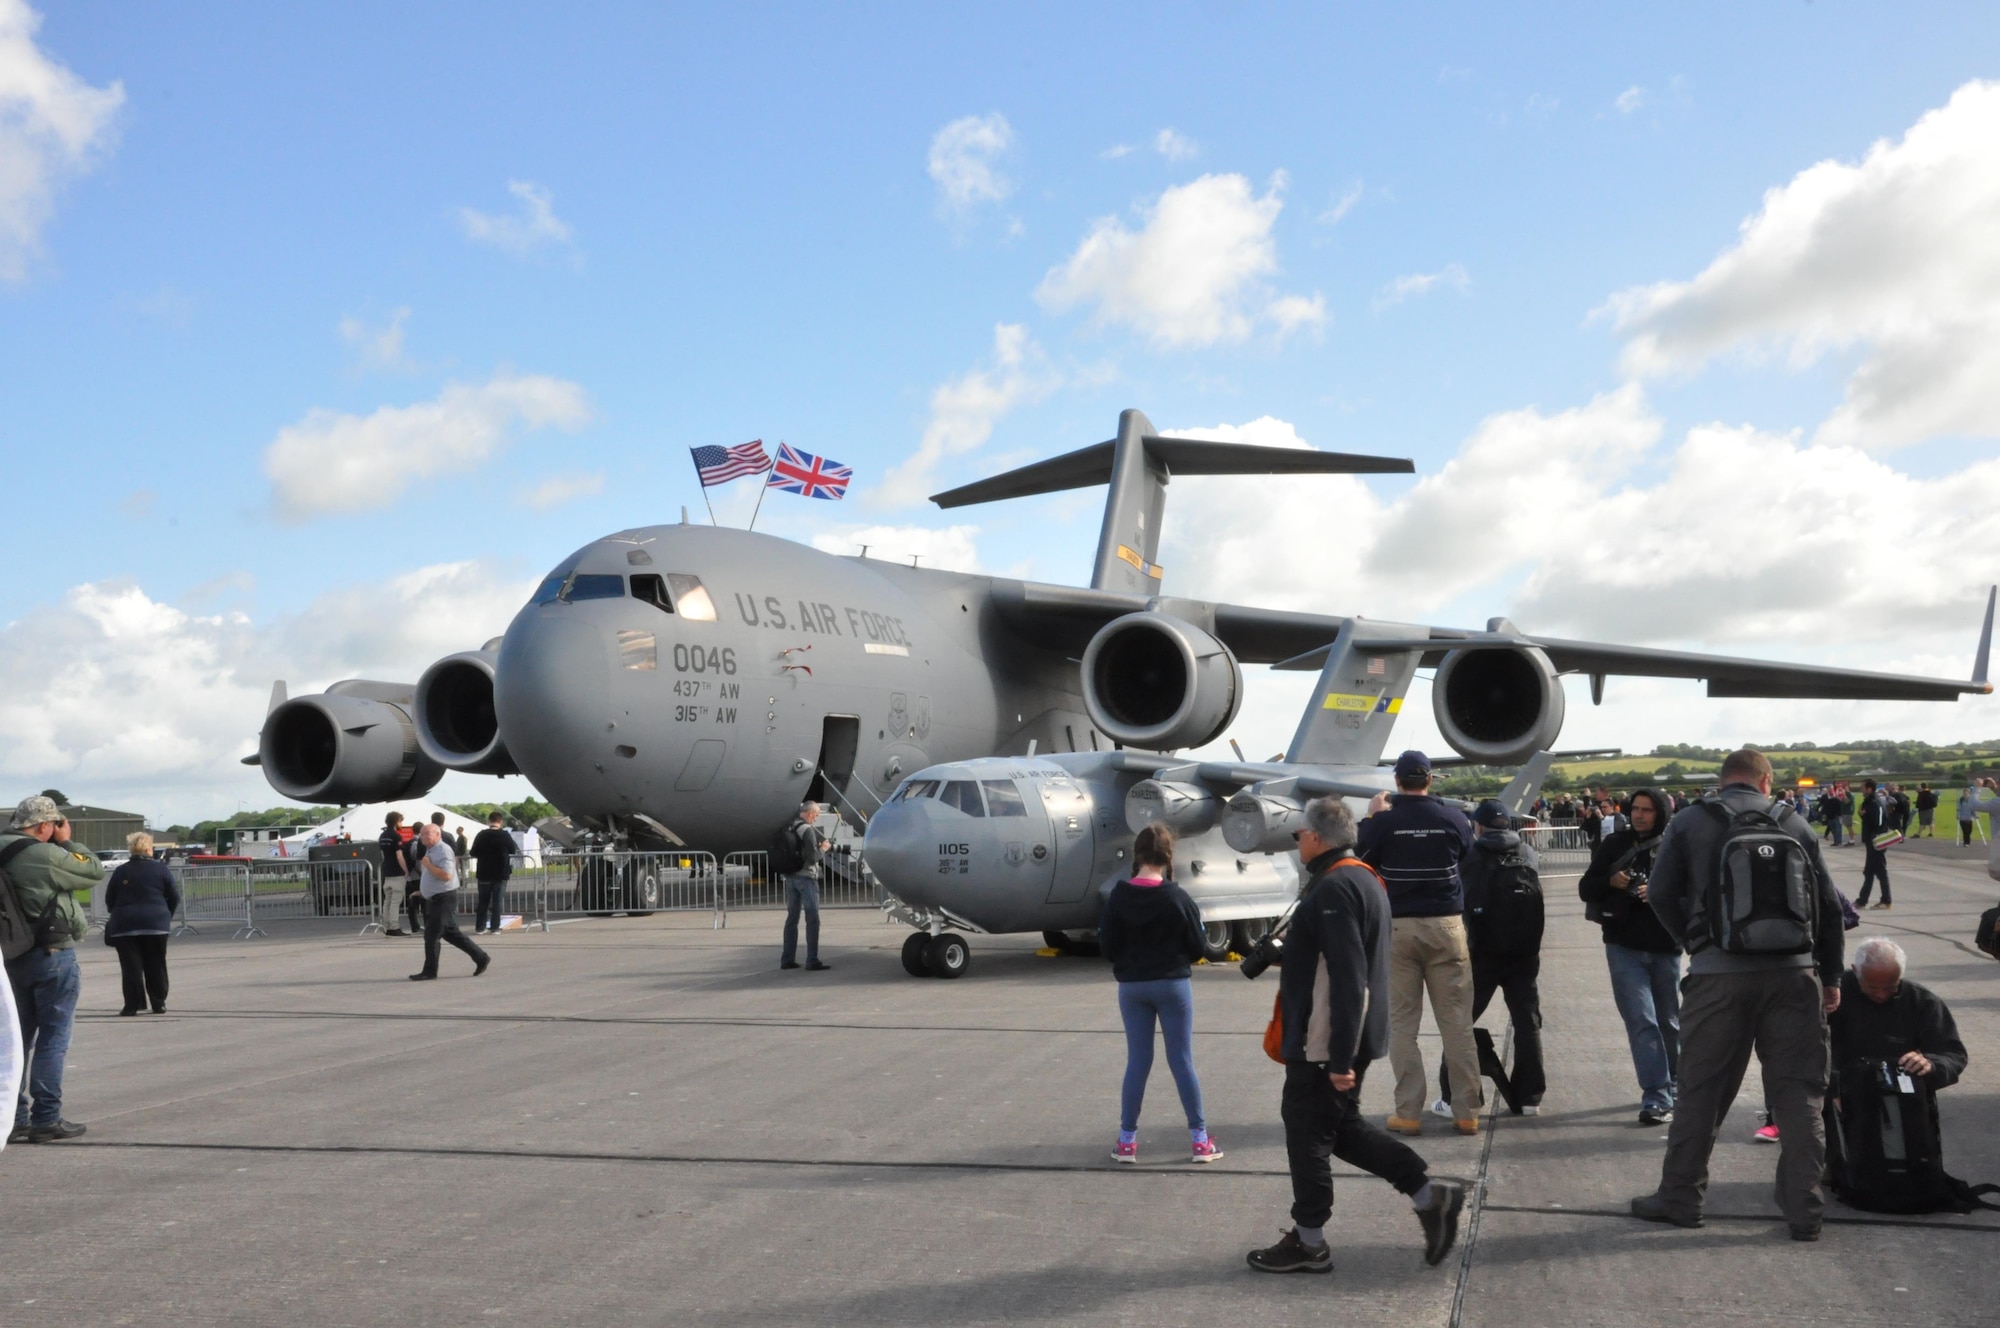 A Charleston C-17 Globemaster III and the 315th Airlift Wing's mini C-17 were popular attractions at the Yeovilton Air Day 2016 at Royal Naval Air Station Yeovilton, England July 2. Nearly 40,000 people crowded into the small British Navy base in order to get peek at aircraft from all over the world. Reservists from the 315th Airlift Wing, participated in the annual air show while also bringing home the show’s top prize, the best static display award. (U.S. Air Force photo by Maj. Wayne Capps)